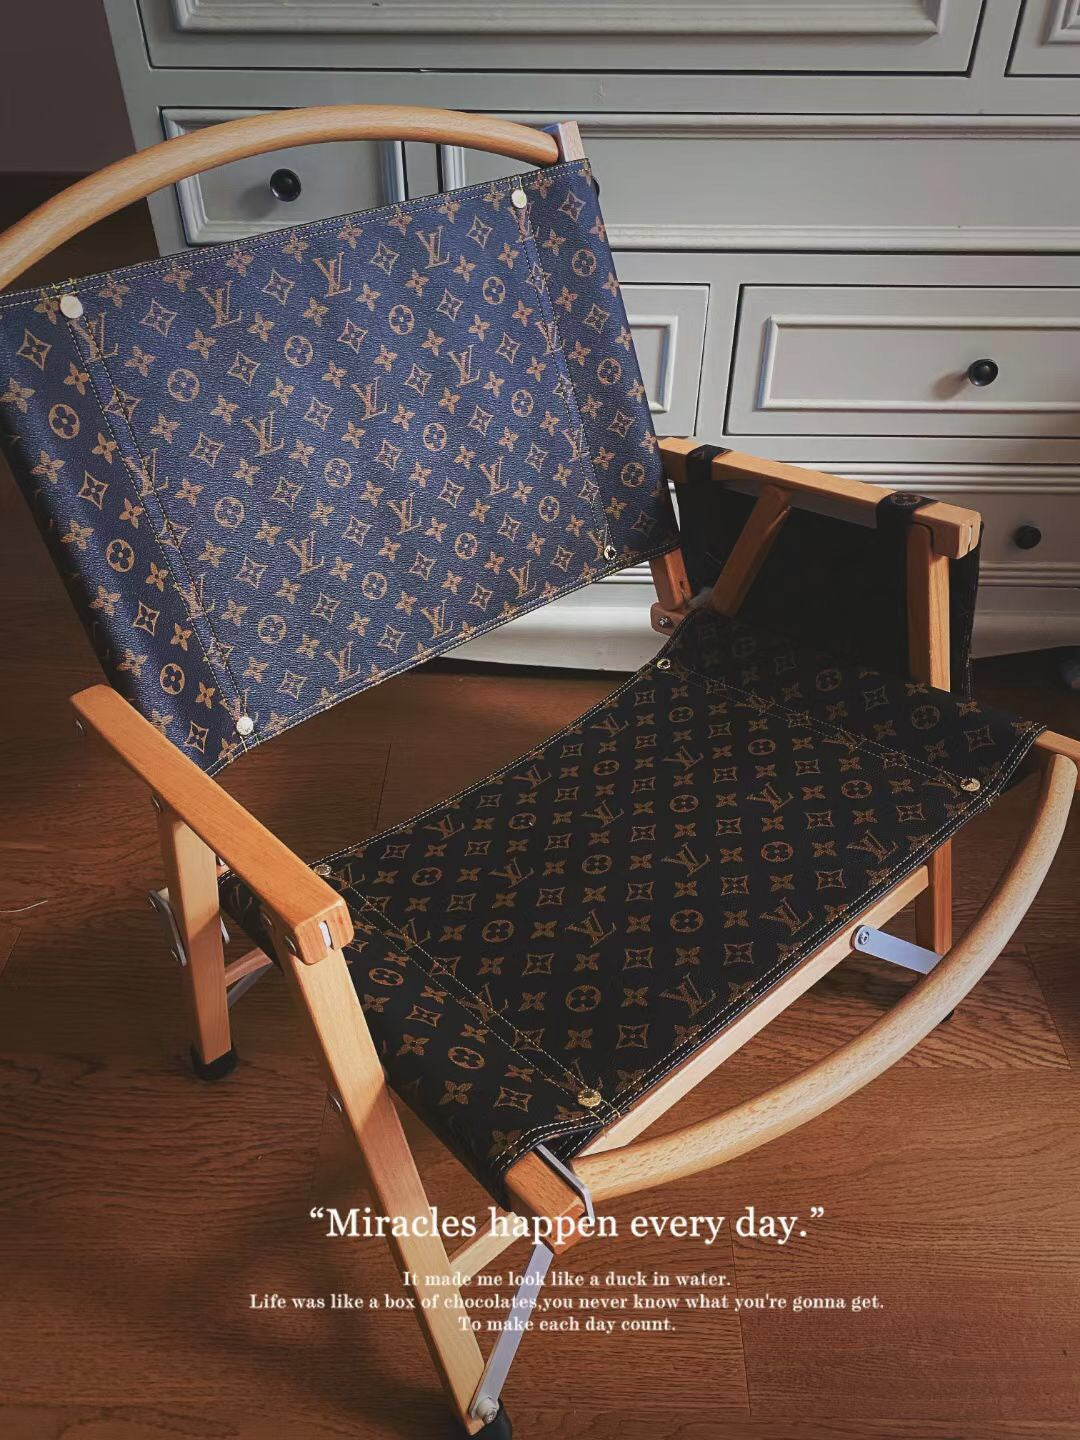 Louis Vuitton inspired folding chairs